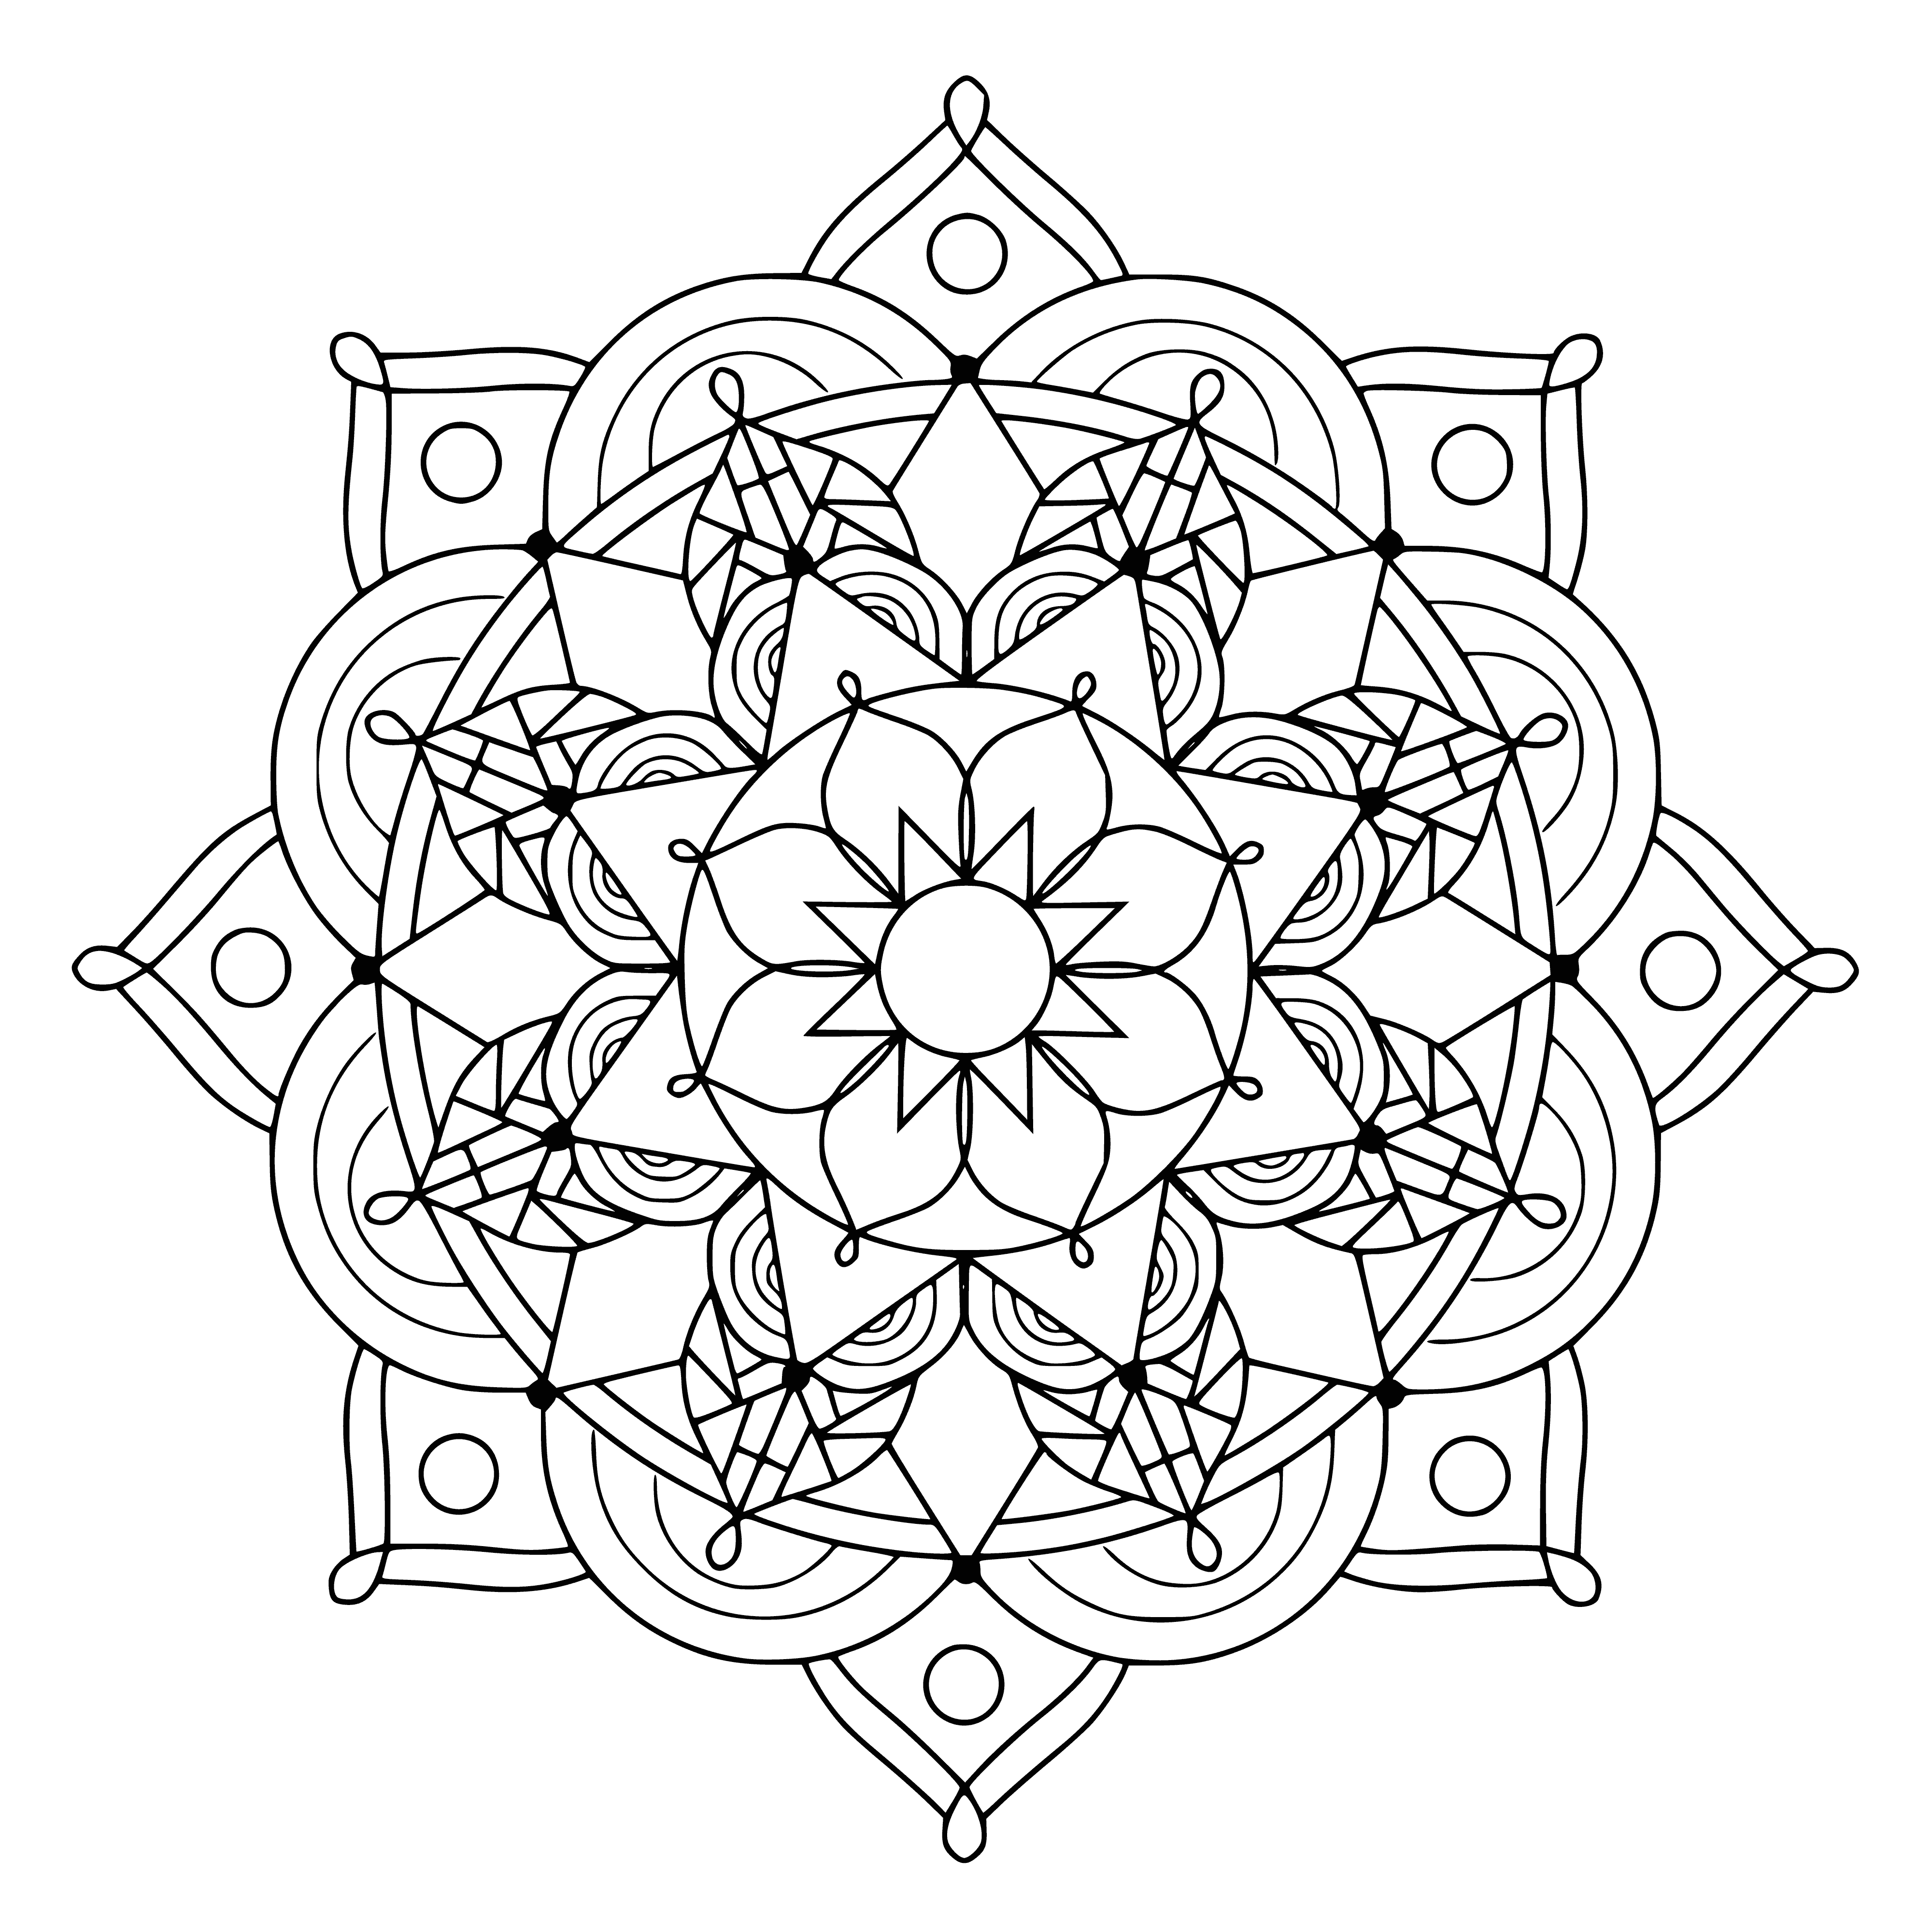 coloring page: Mandala is a circular figure with a repeating pattern and intricate colored borders. A great coloring page to enjoy! #coloring #mandala